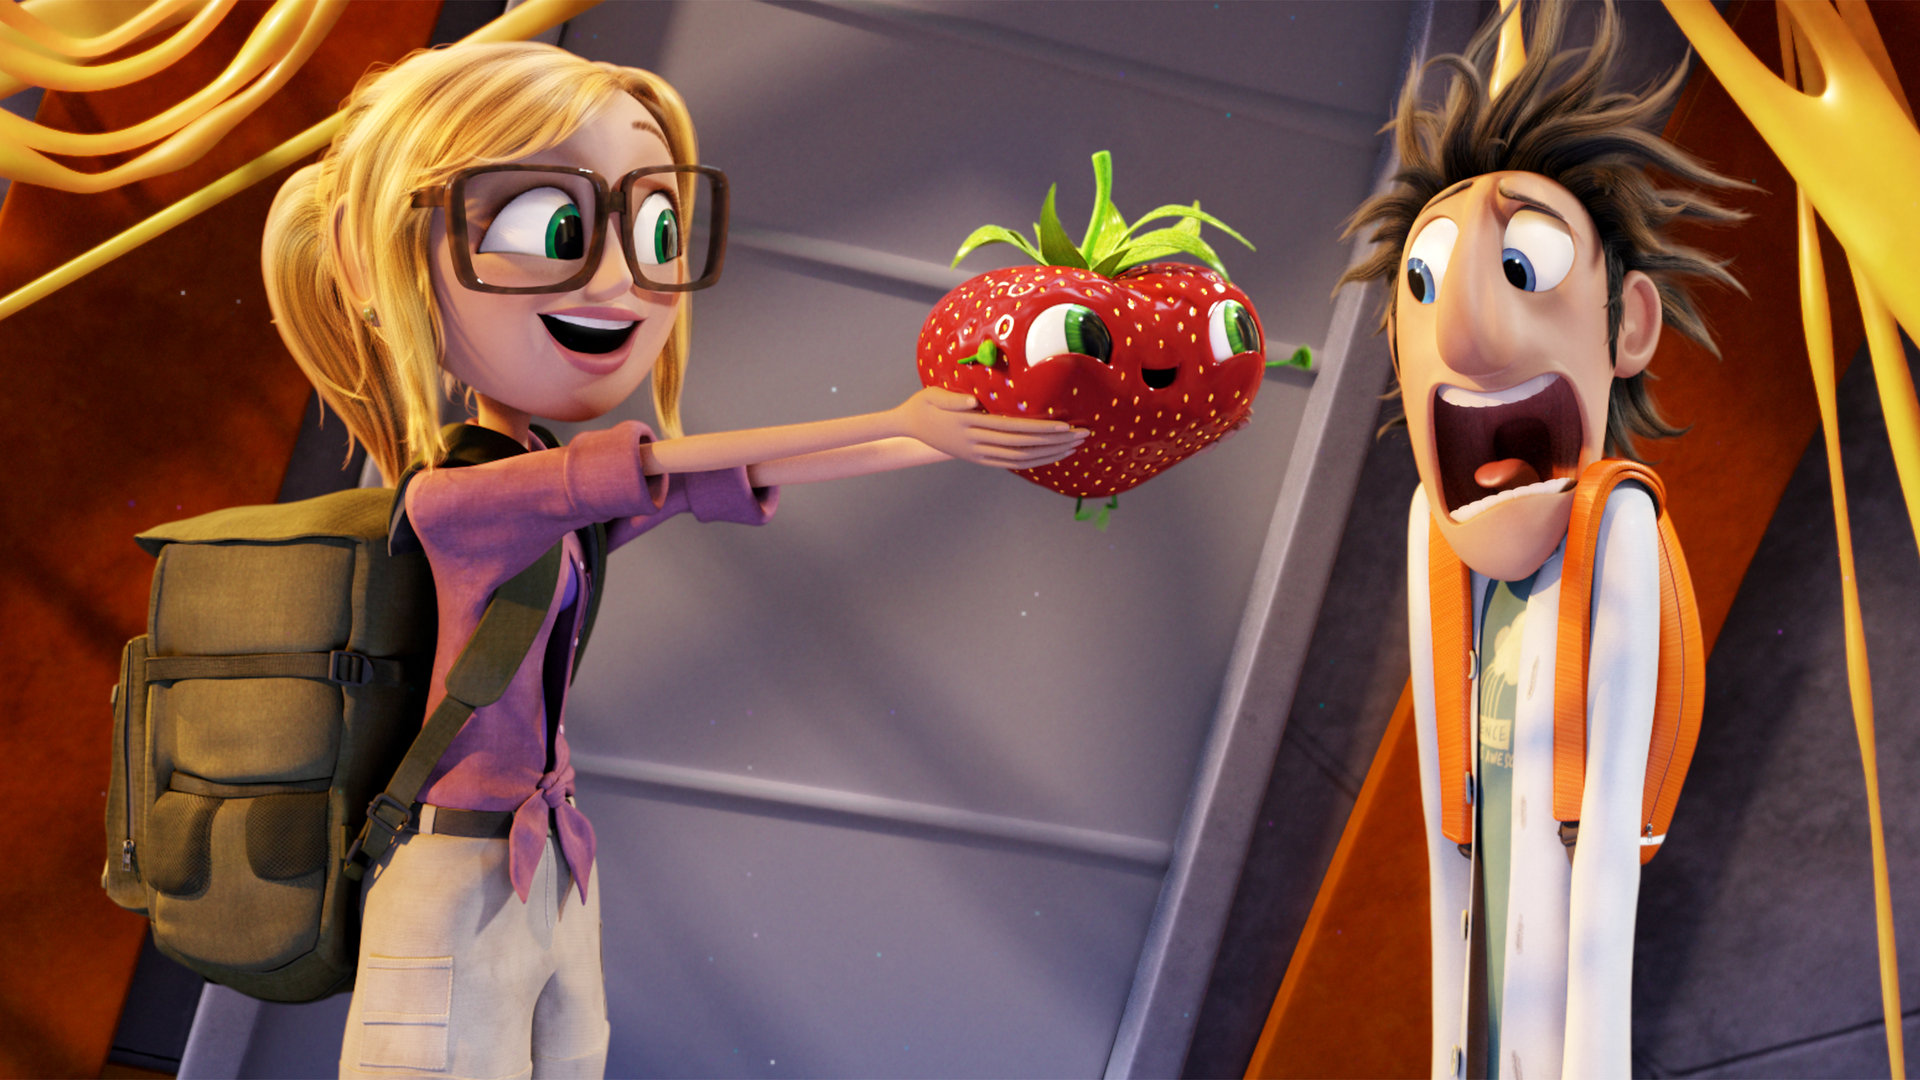 Best Cloudy With A Chance Of Meatballs 2 wallpaper ID:163997 for High Resolution full hd computer